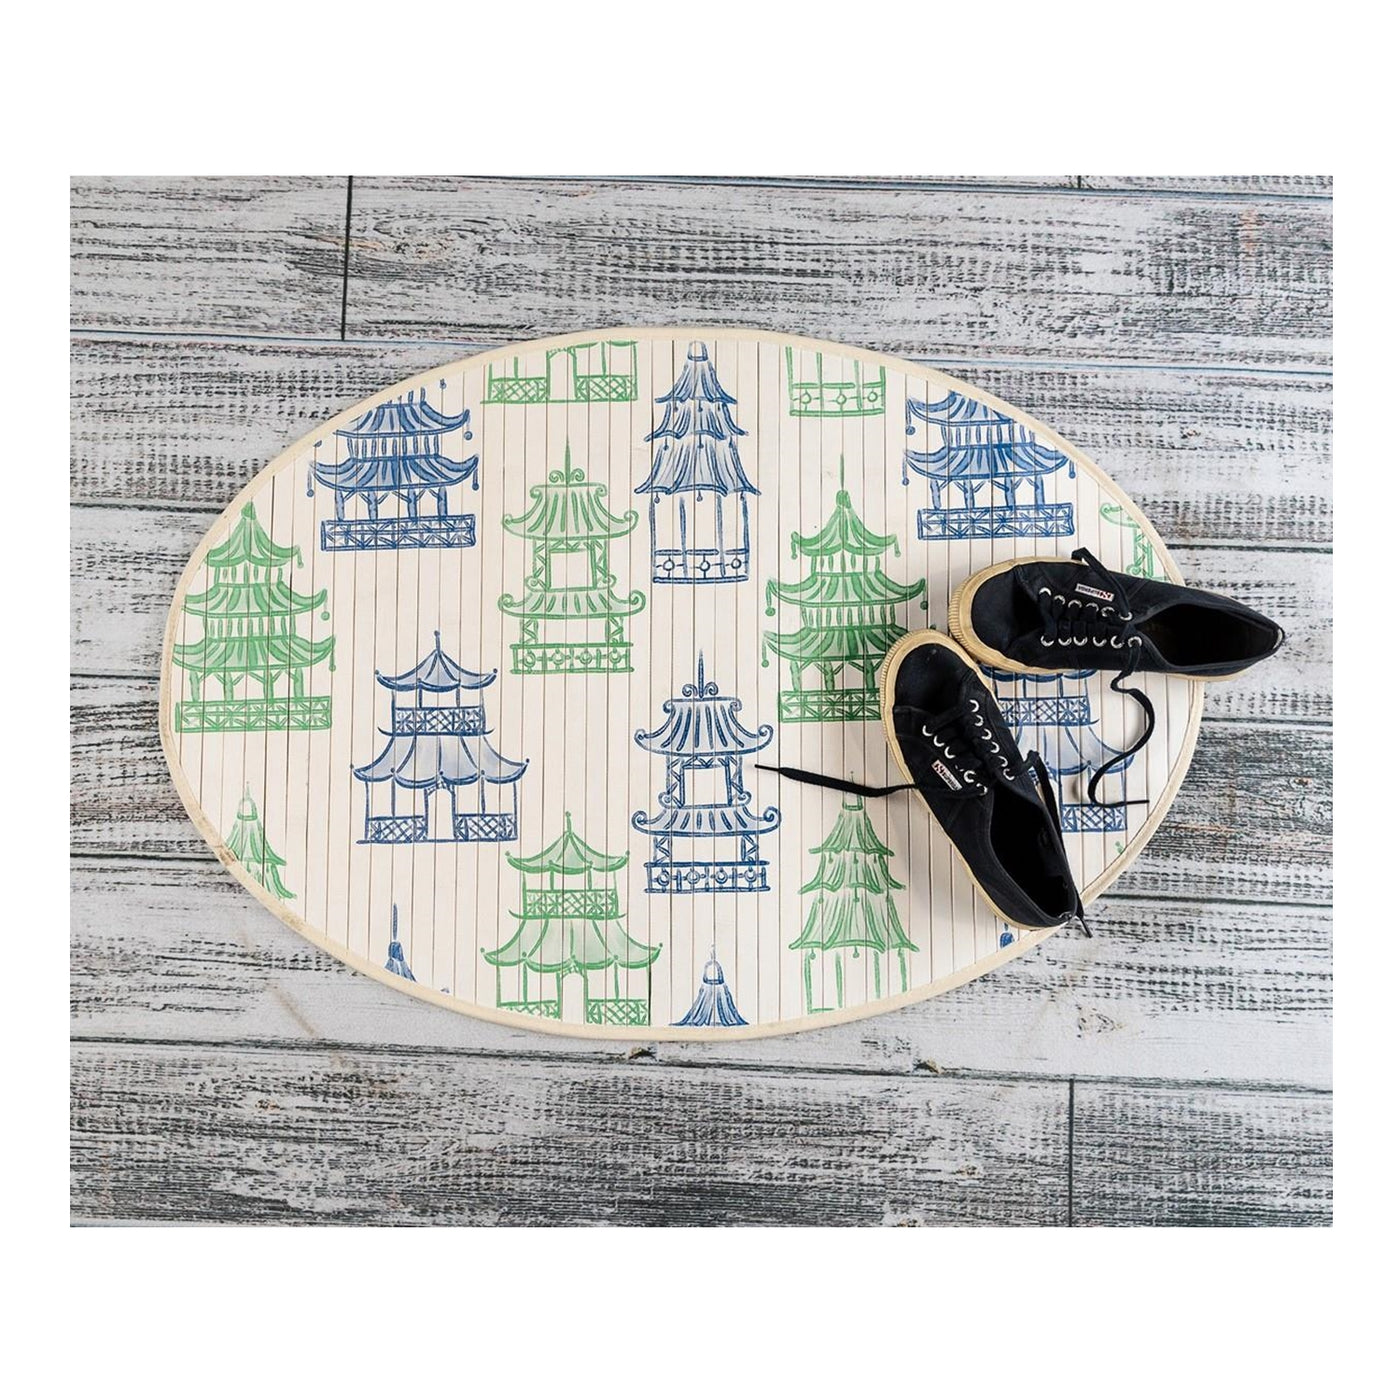 Oval Bamboo Mat - Blue and Green Pagoda  35" x 24"